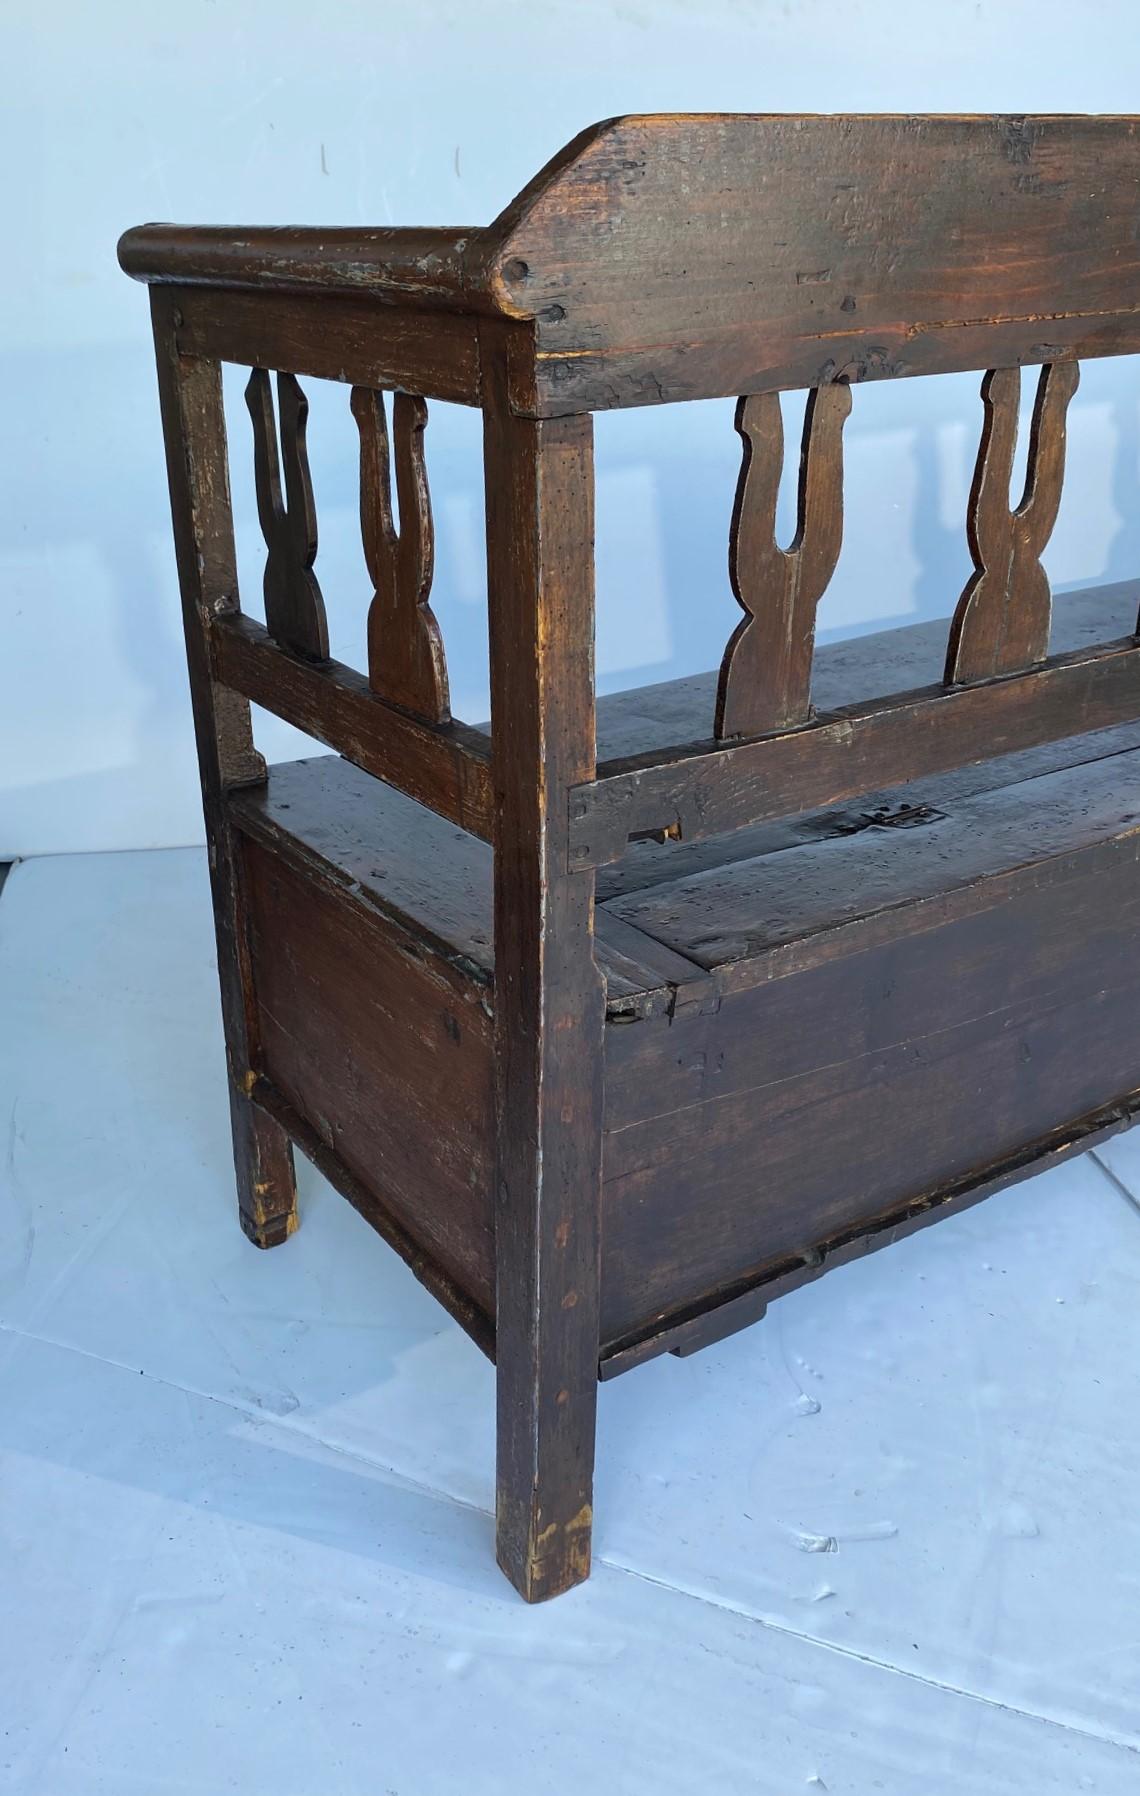 19th-century European rustic bench with storage.